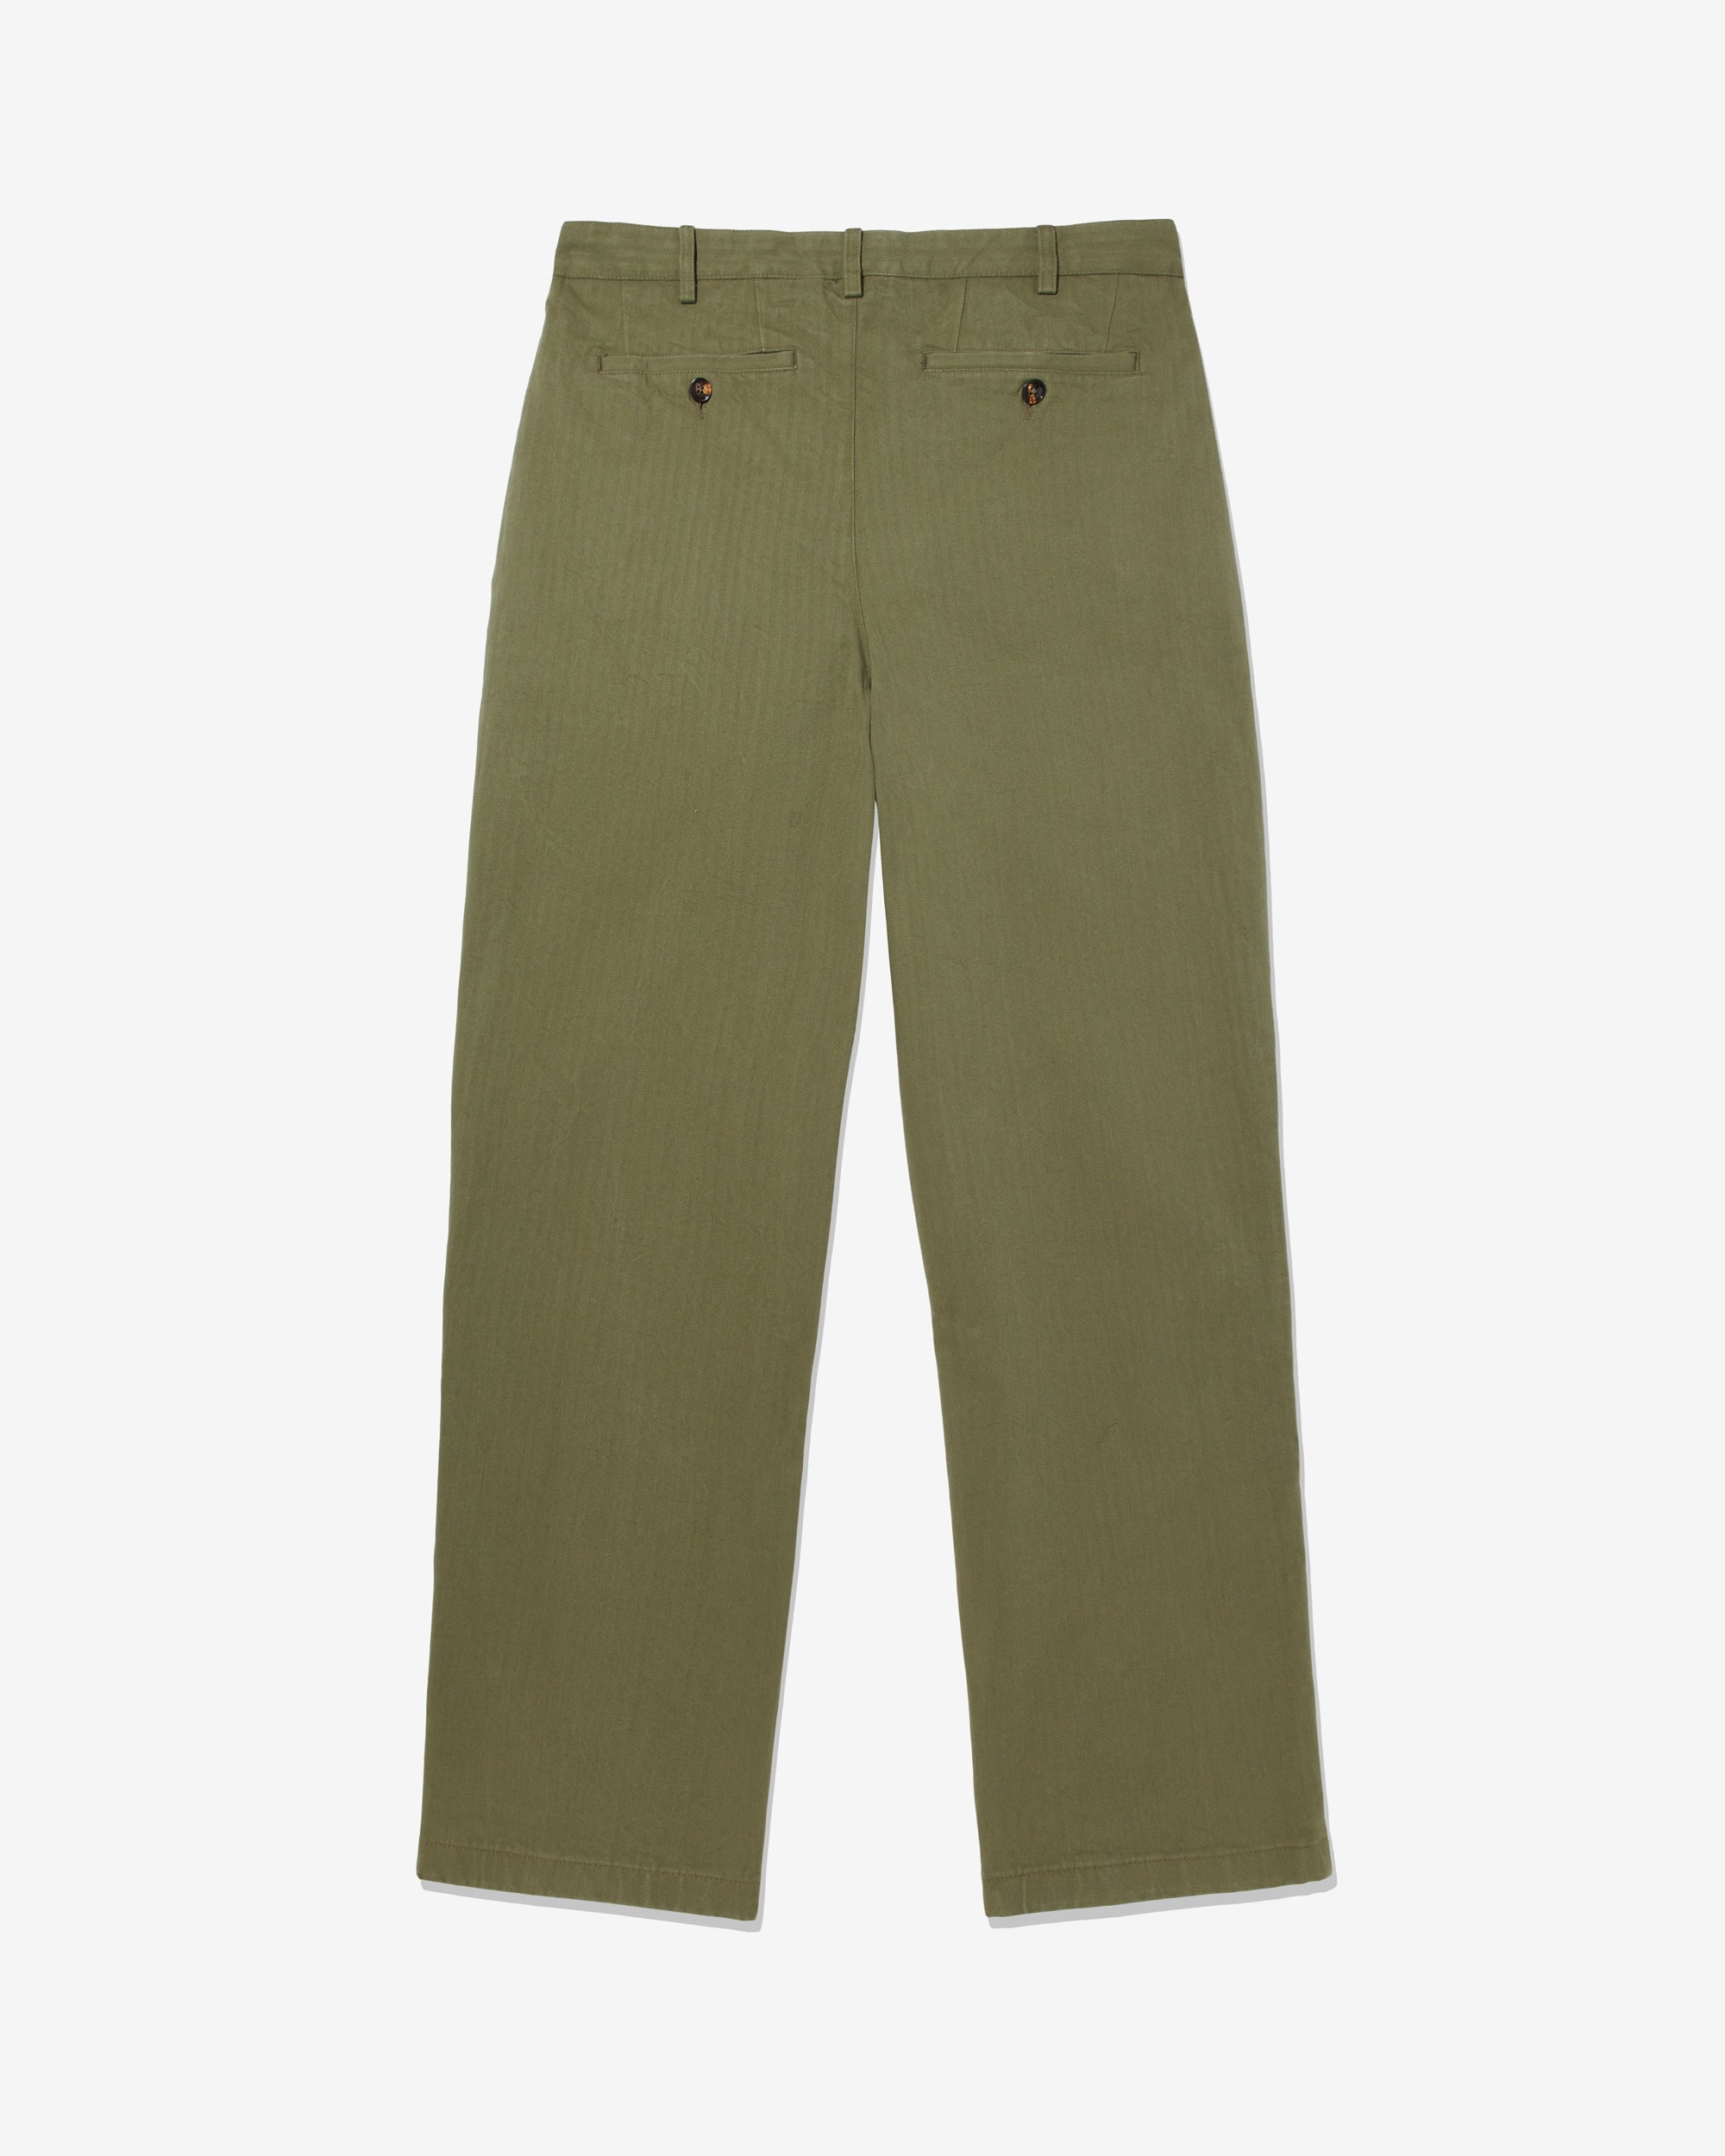 Pants - Trousers, Jeans, Chinos and Shorts - Noah